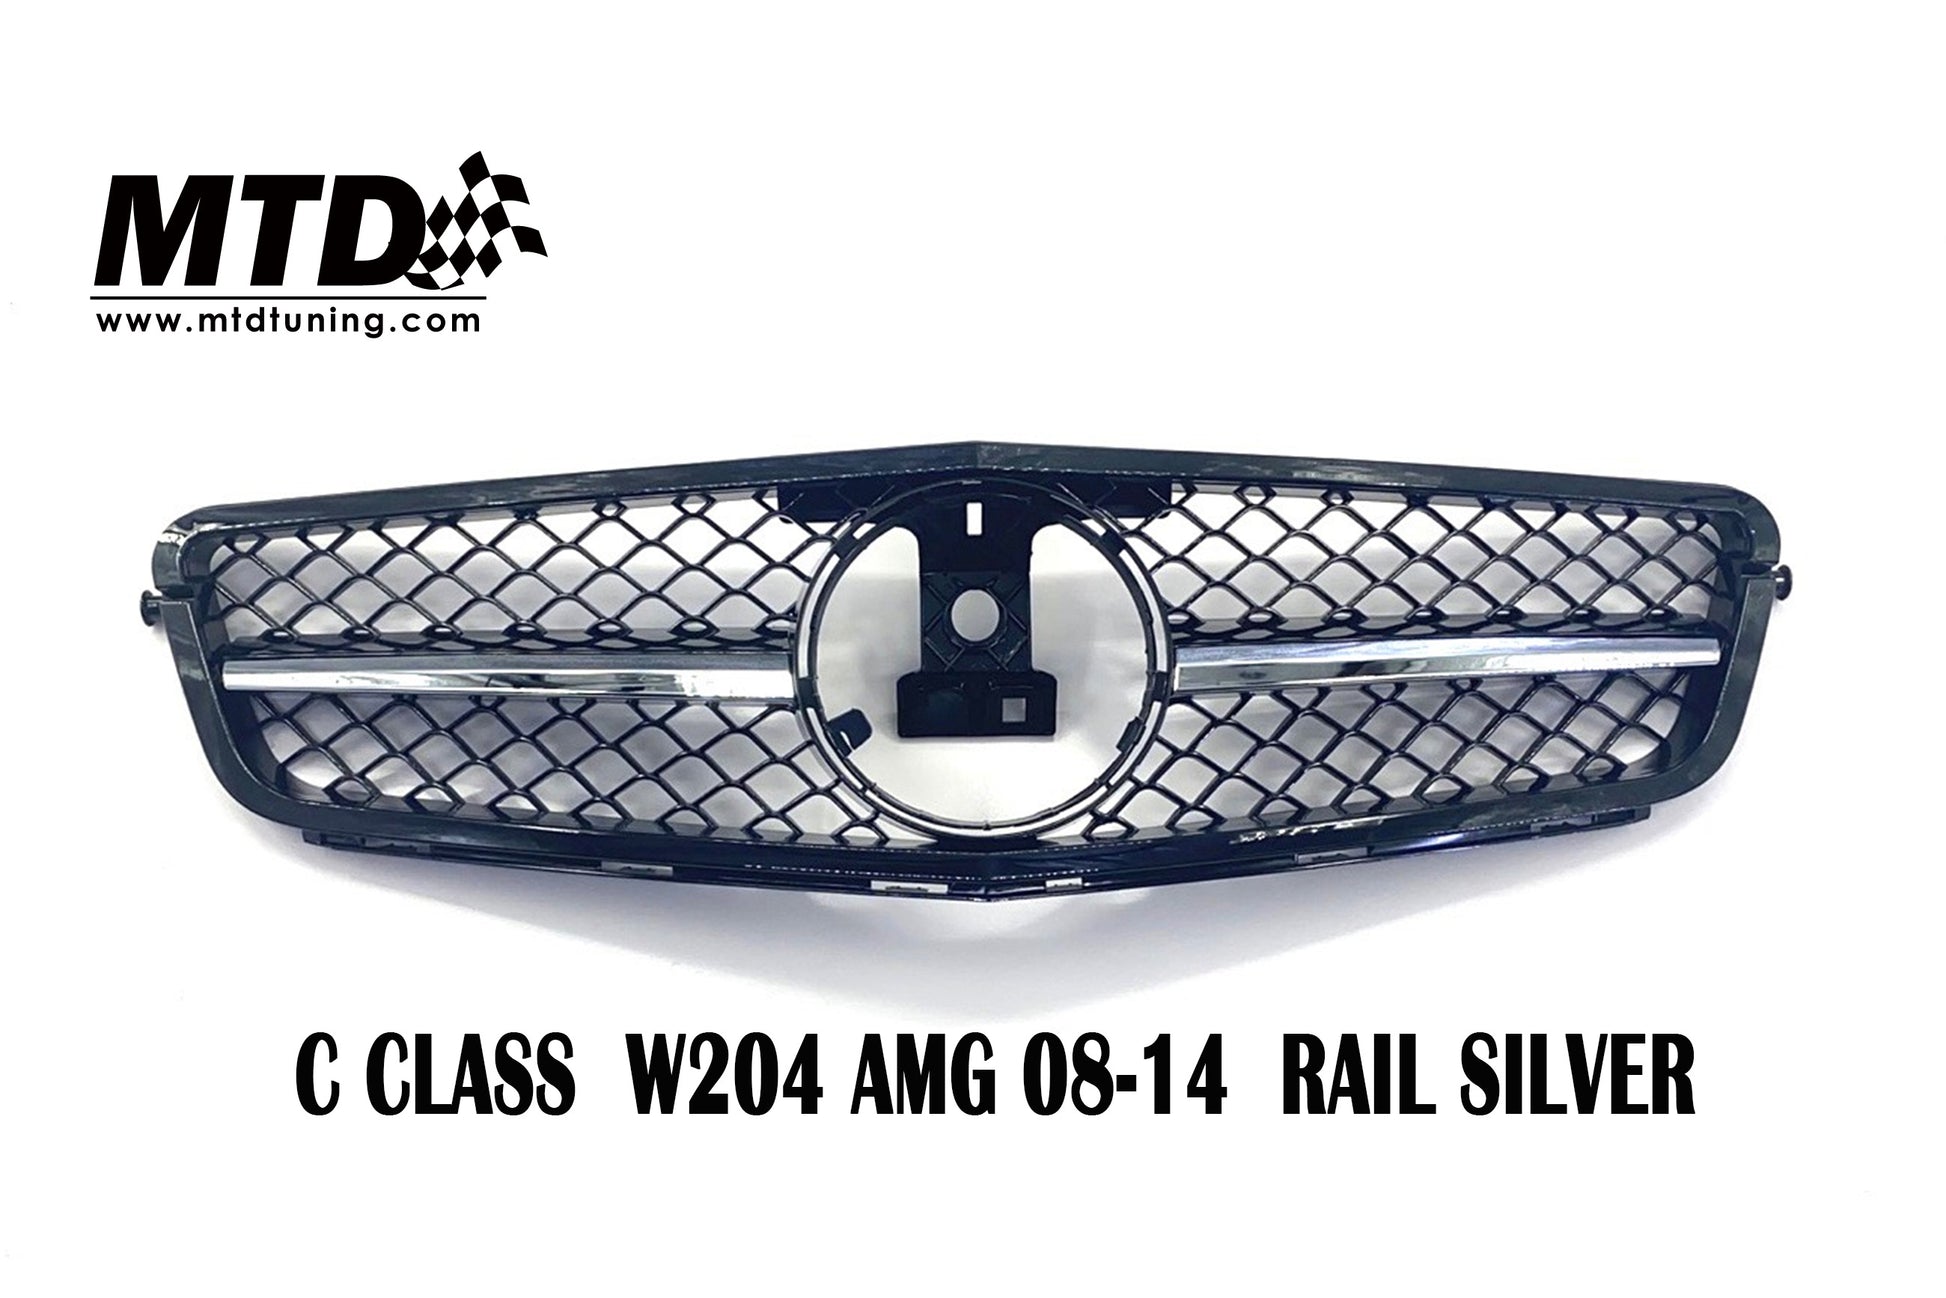 Mercedes-Benz C Class W204 Front Grille AMG 08-14 Rail Silver